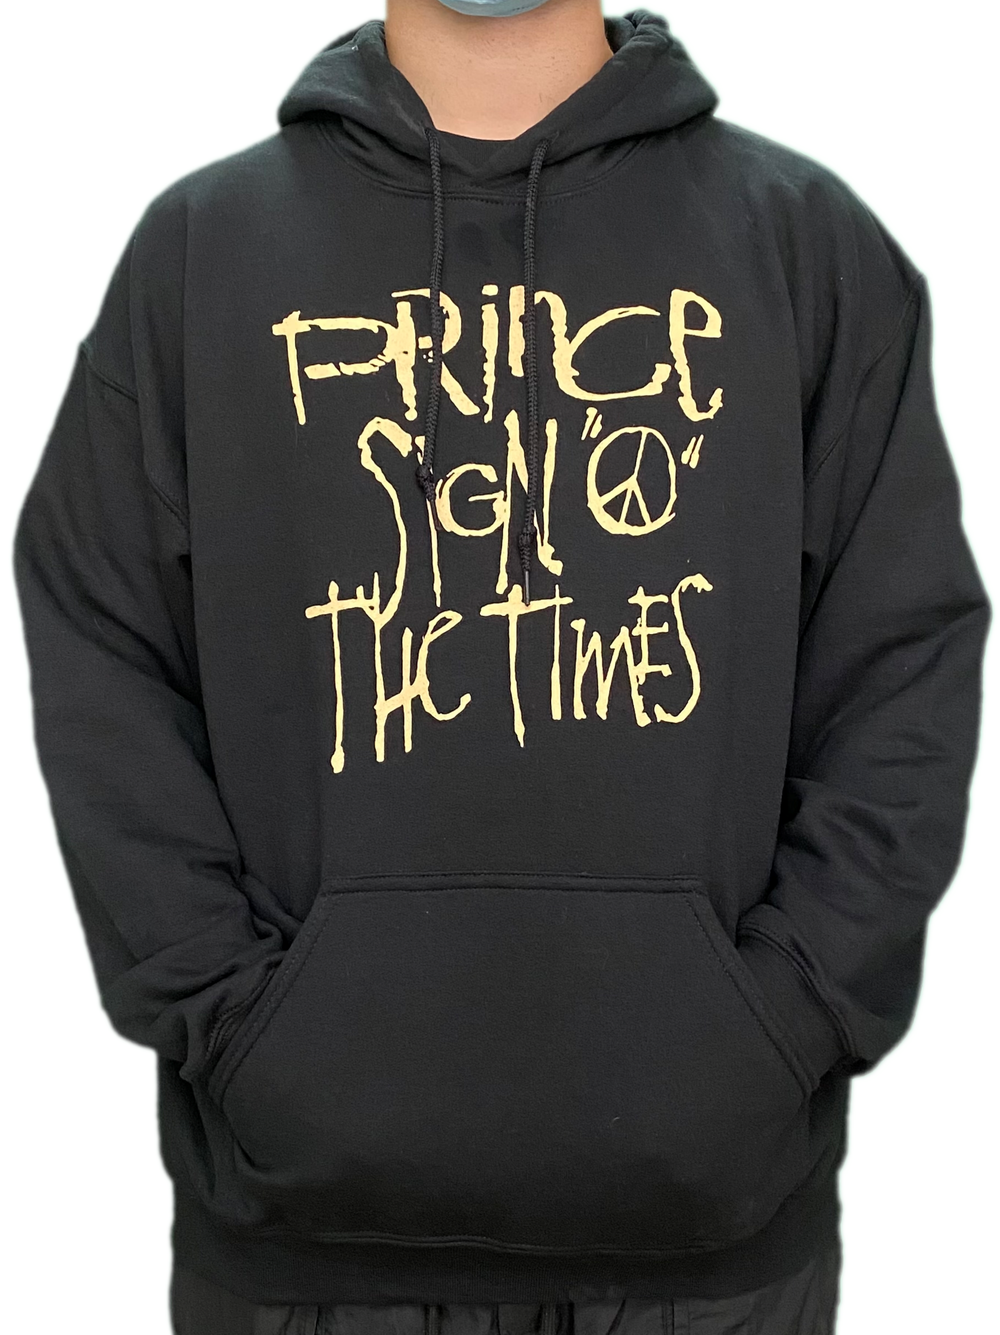 Prince – SIGN 'O' THE TIMES Xclusive Official Unisex Hoodie LTD ED  FRONT TEXT